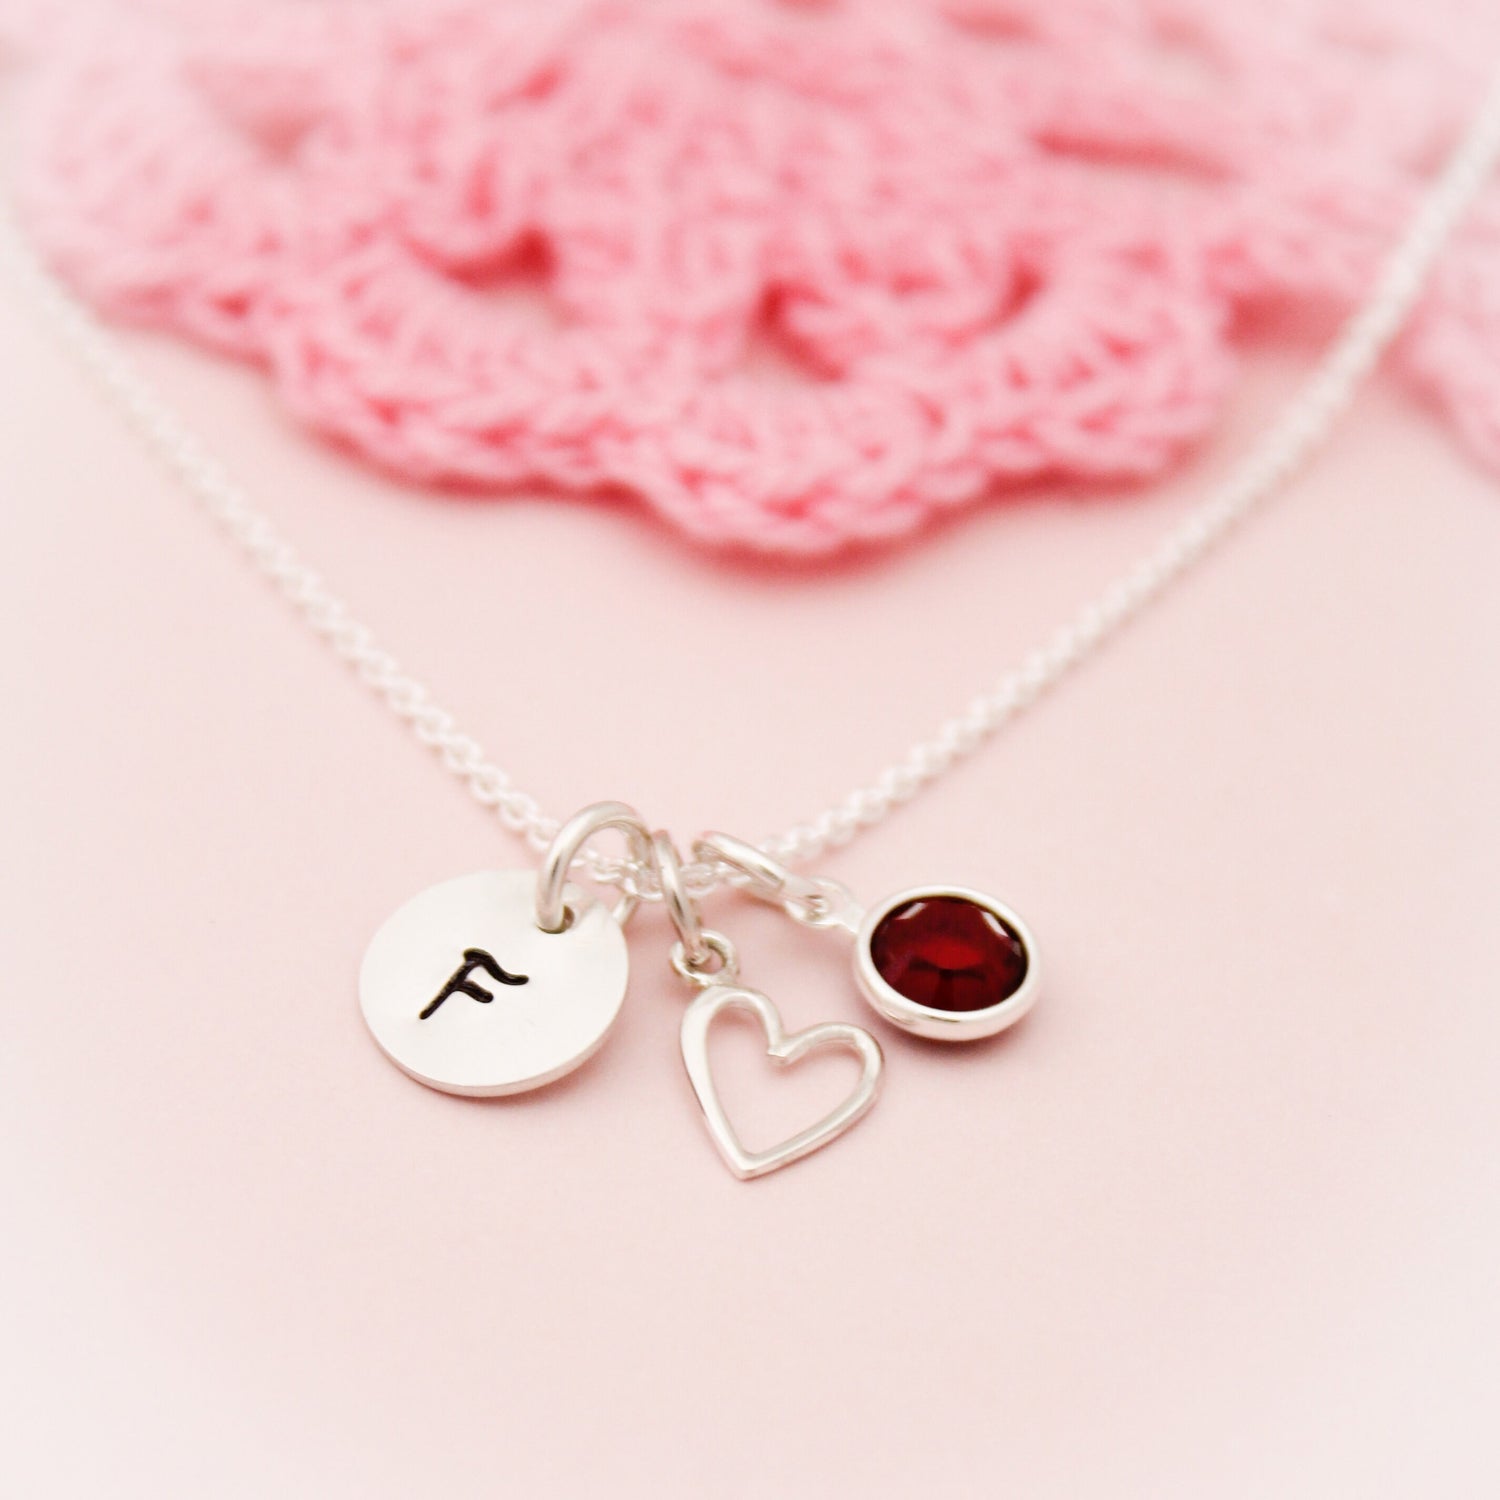 Tiny Initial and Heart Necklace in Sterling Silver Hand Stamped Personalized Jewelry